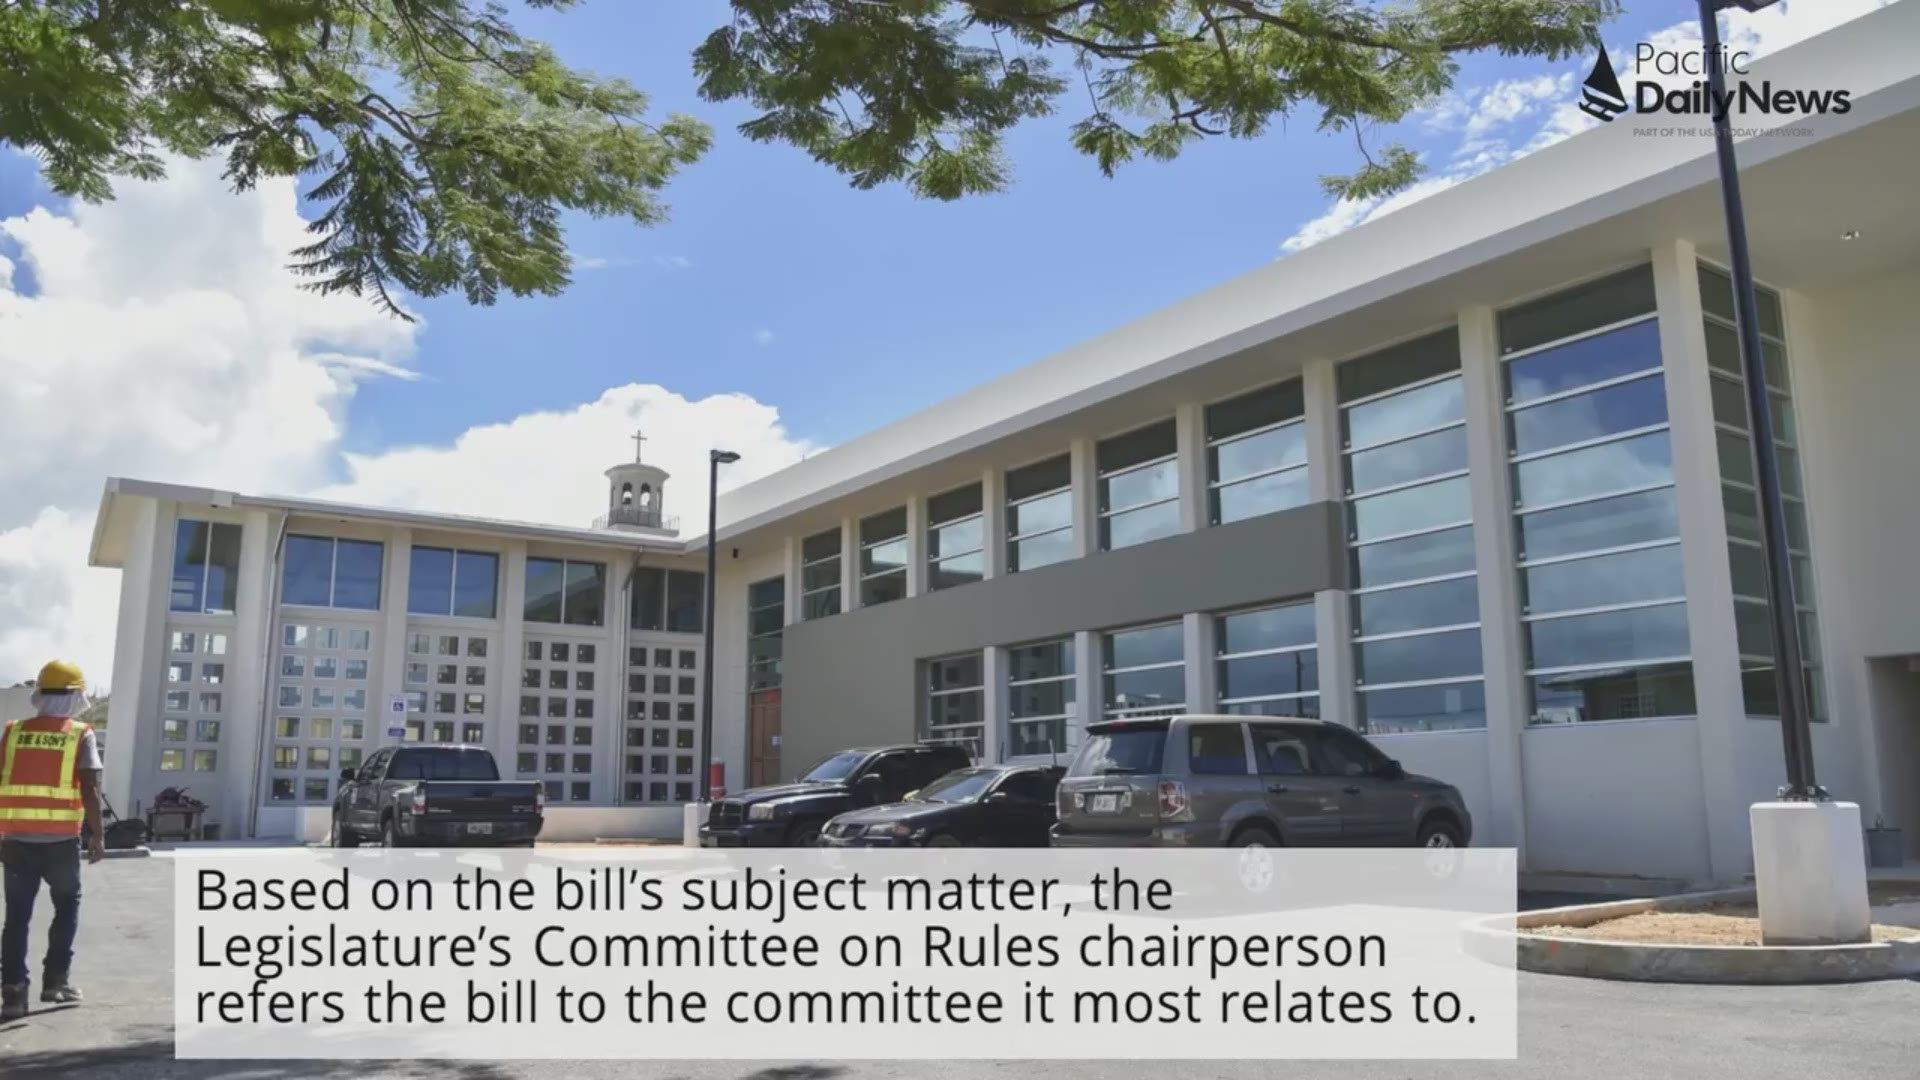 Bills lawmakers author and introduce go through a series of steps at the Guam Legislature before becoming a law. Shawn Raymundos